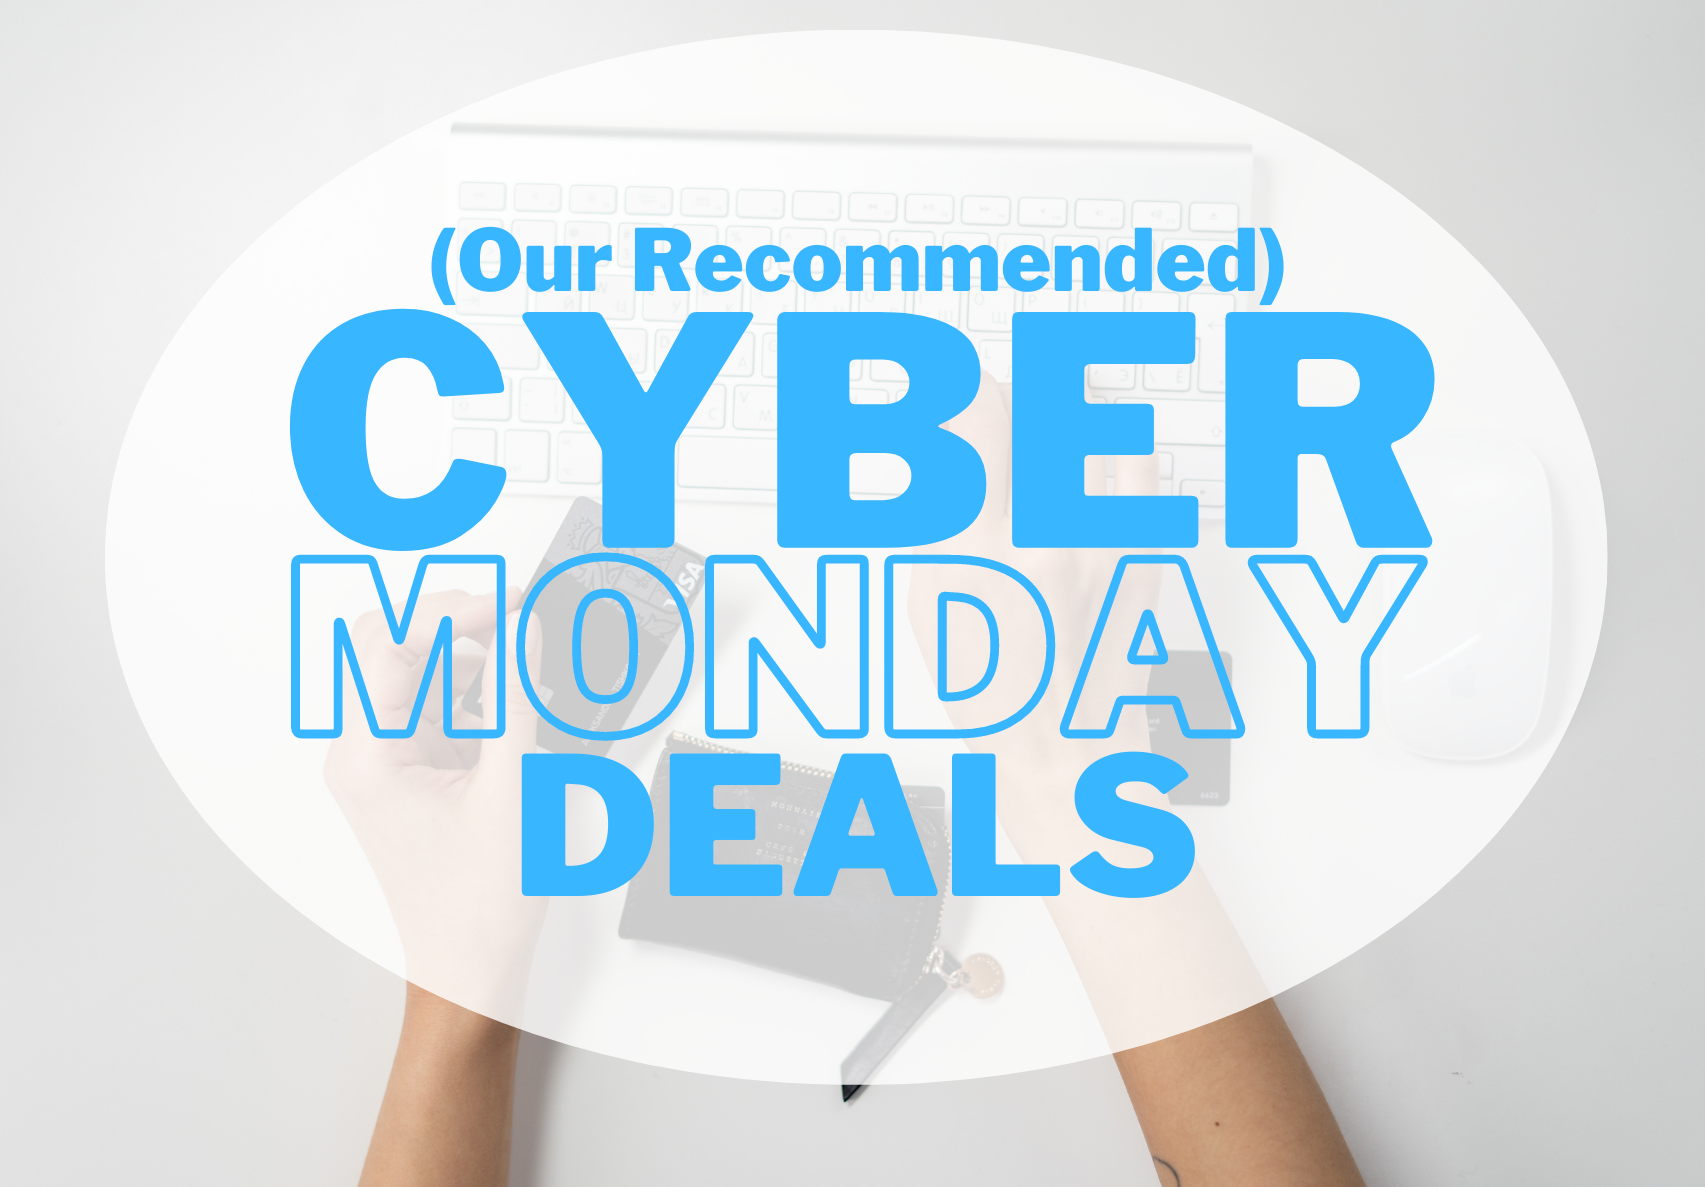 Our Recommended Cyber Monday Deals